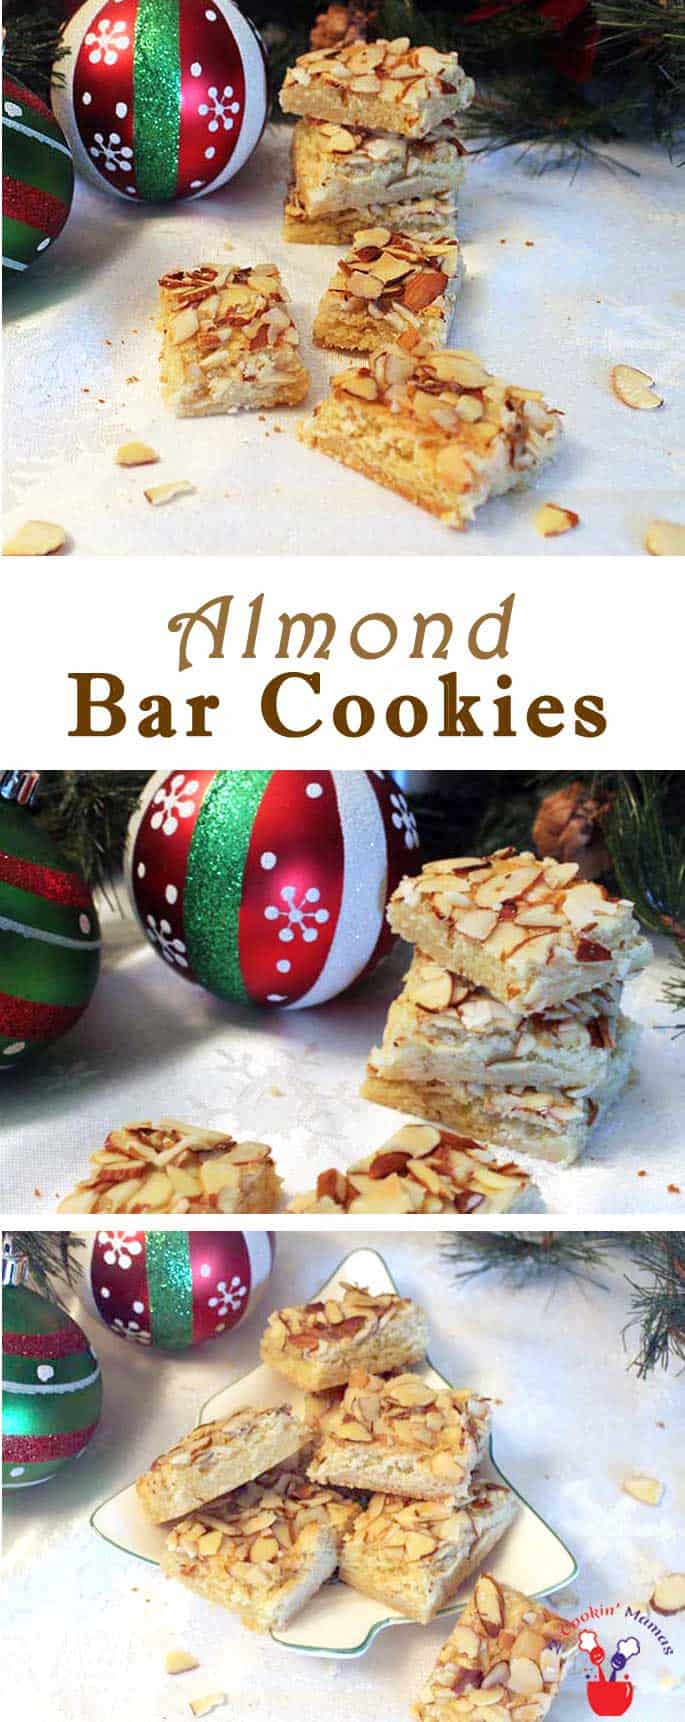 Almond Bar Cookies | 2 Cookin Mamas Almond lovers will love these simple almond bar cookies. An almond shortbread cookie is topped with slivered almonds and baked for a buttery cookie with a crunch. #recipe